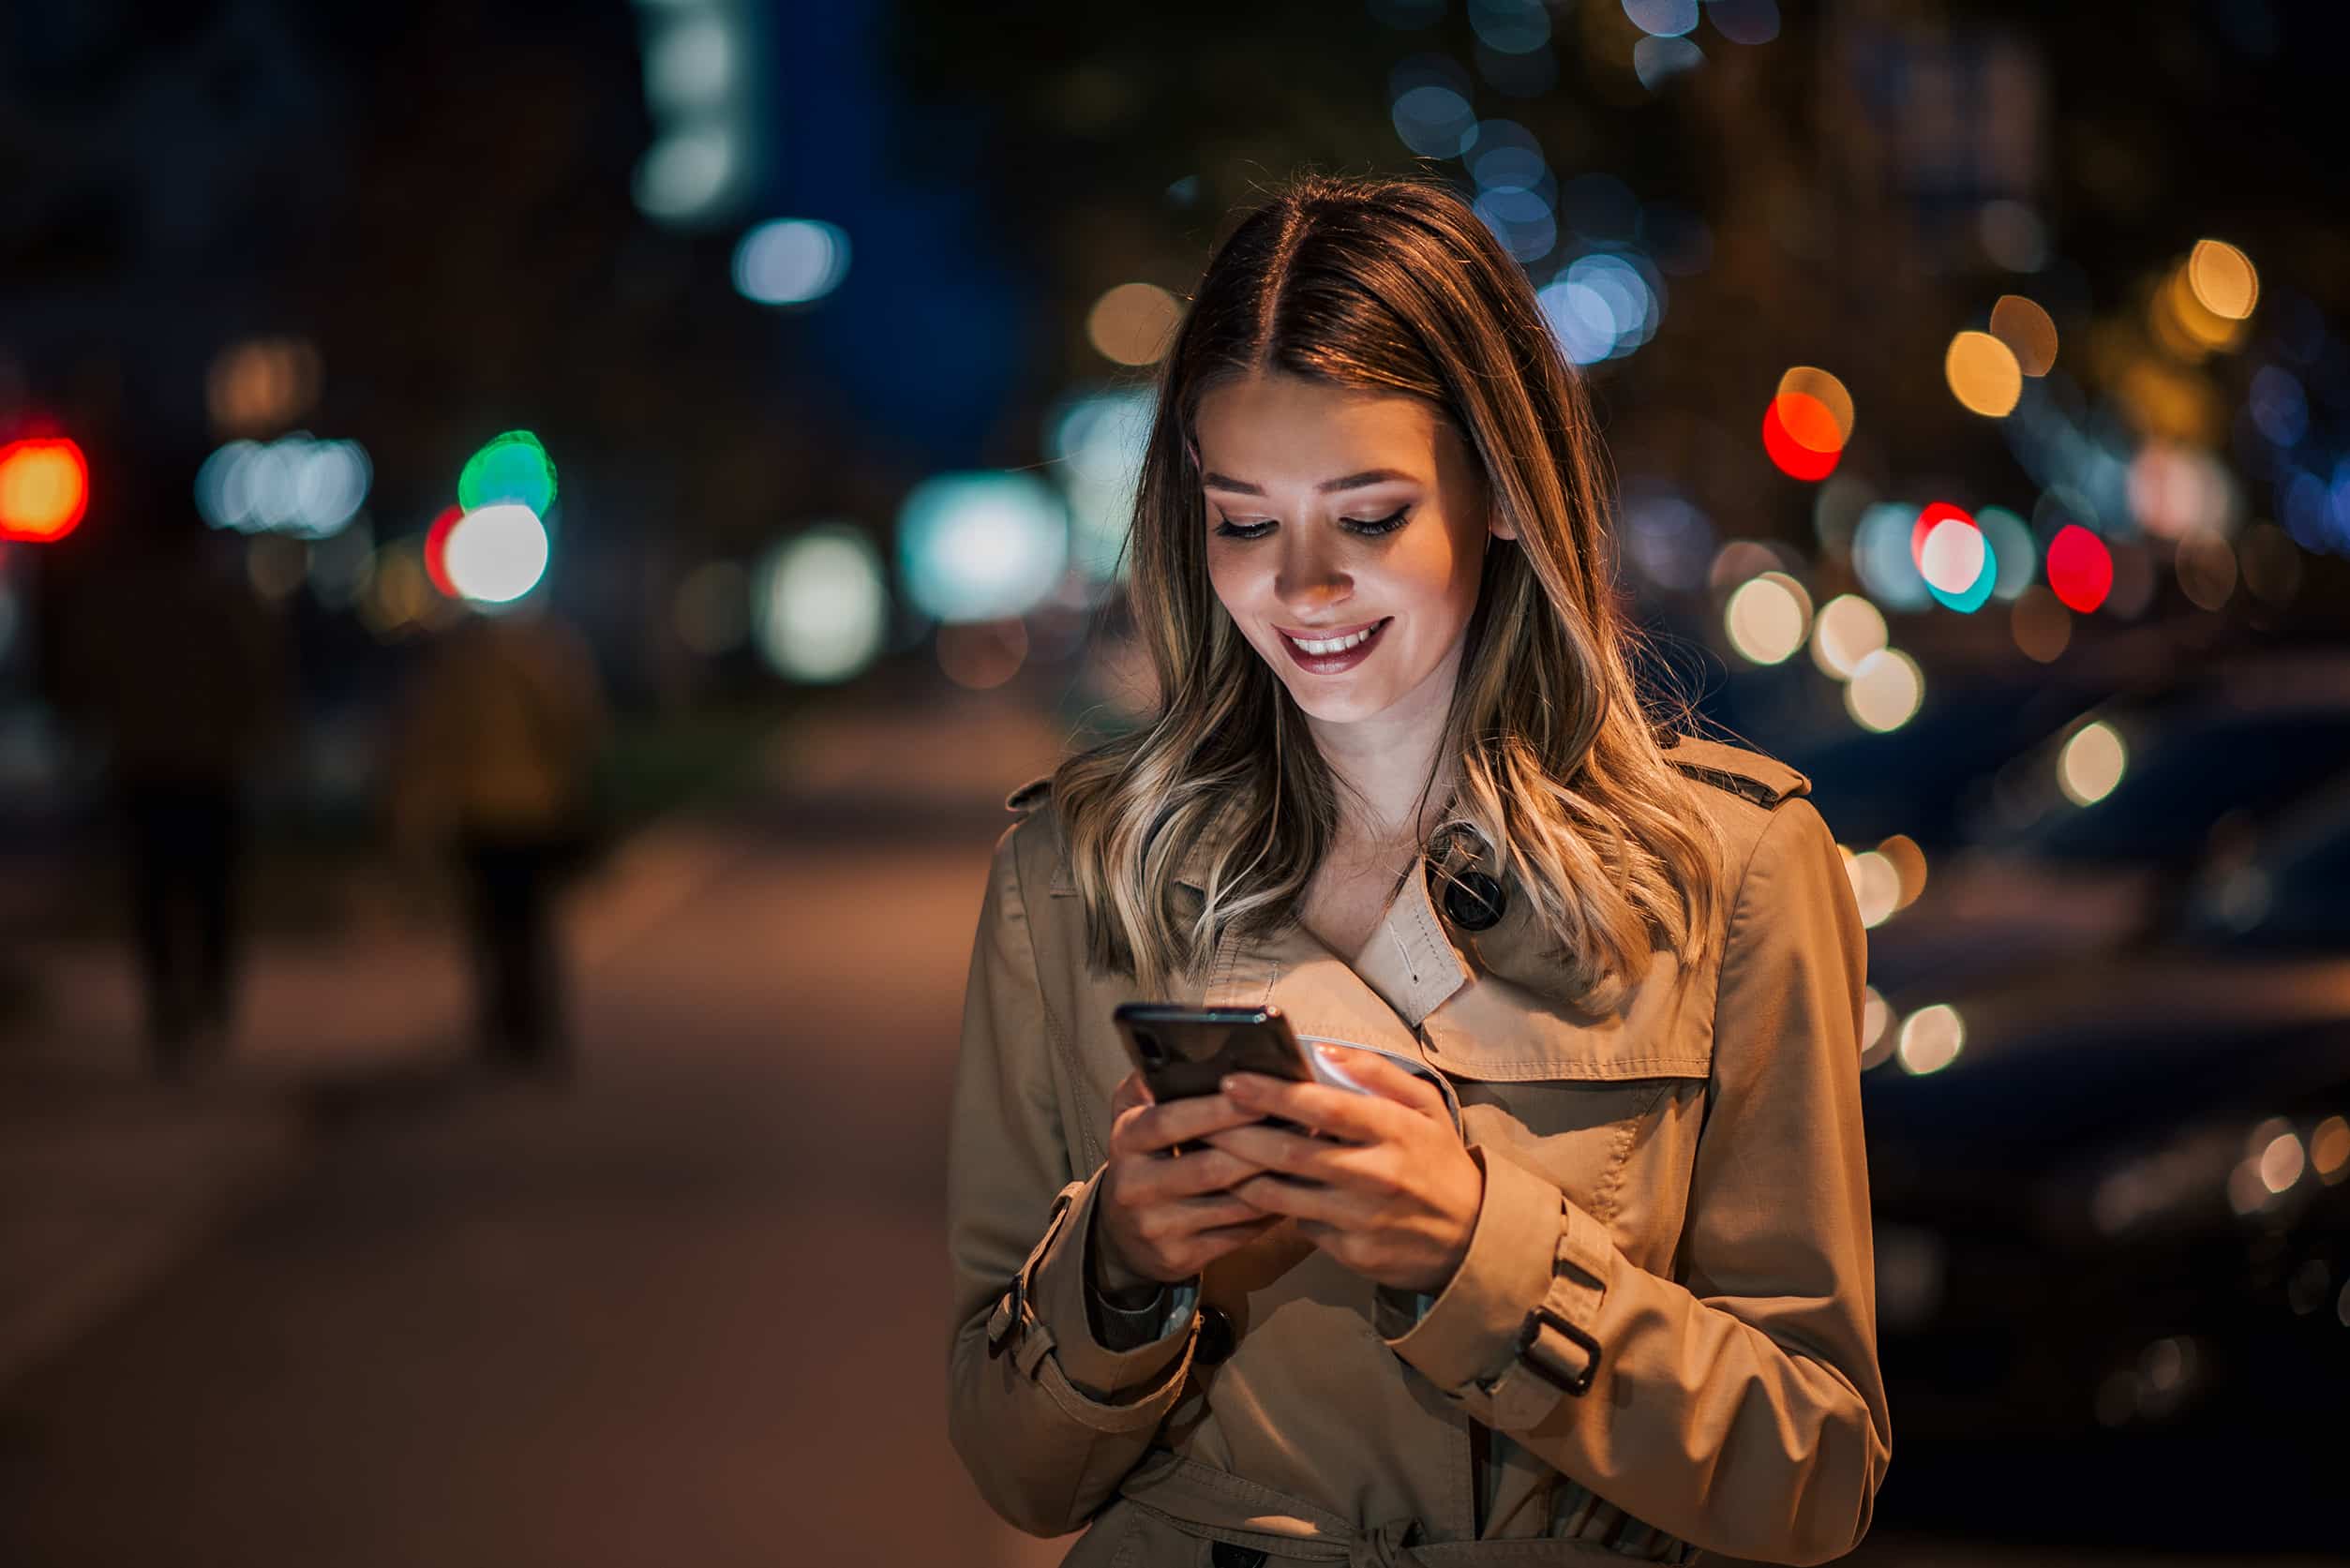 Portrait of a smiling young woman using smart phone at night.